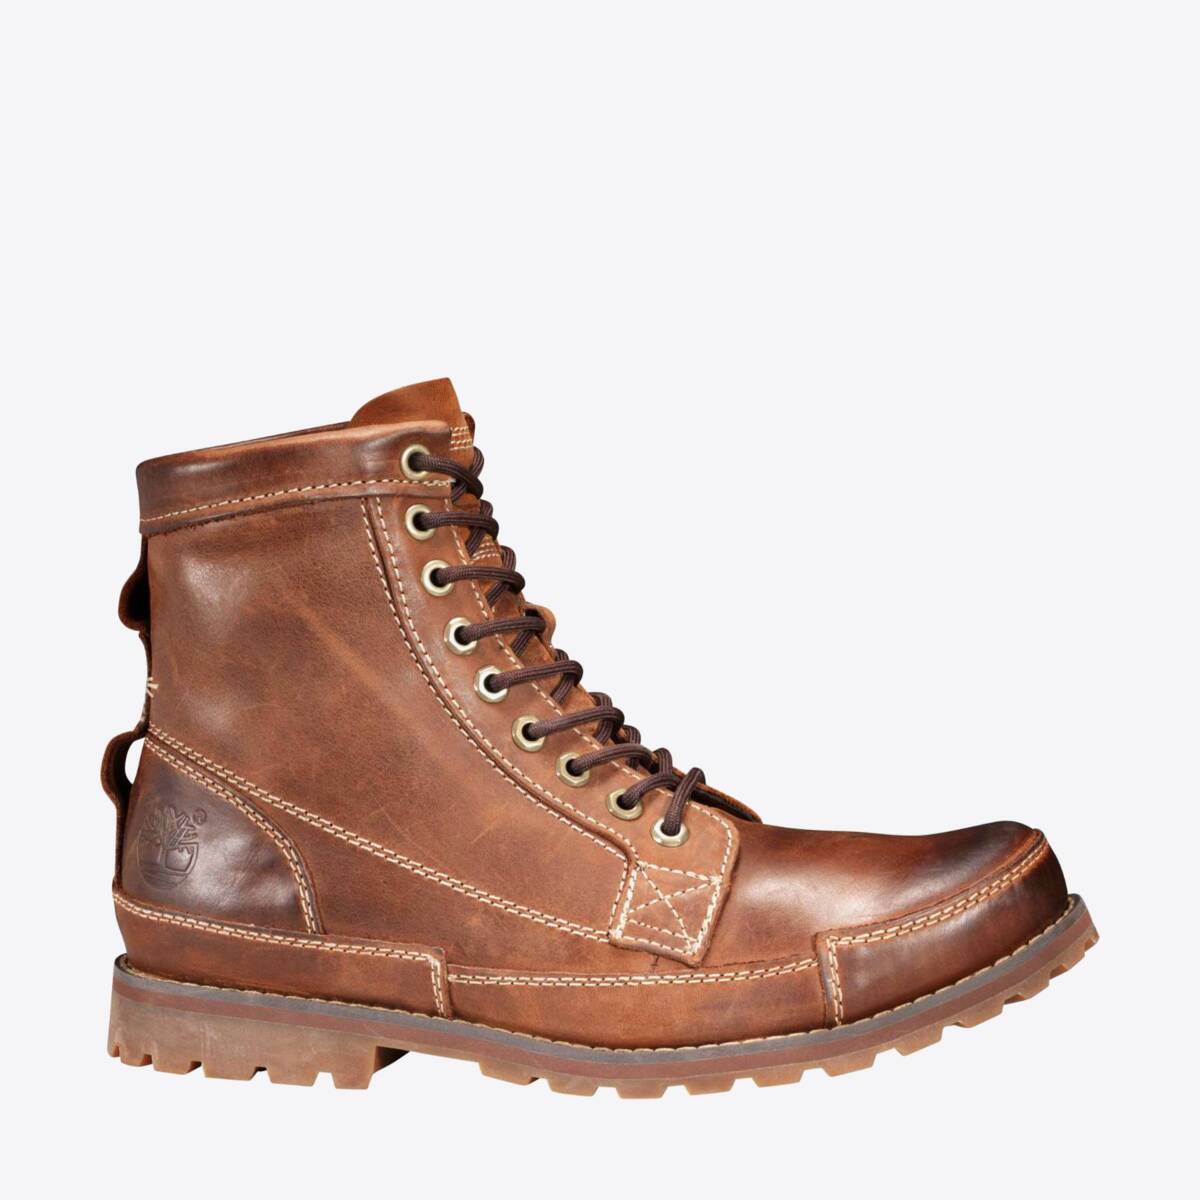 TIMBERLAND Earthkeepers Original 6-Inch Boot Brown - Image 1